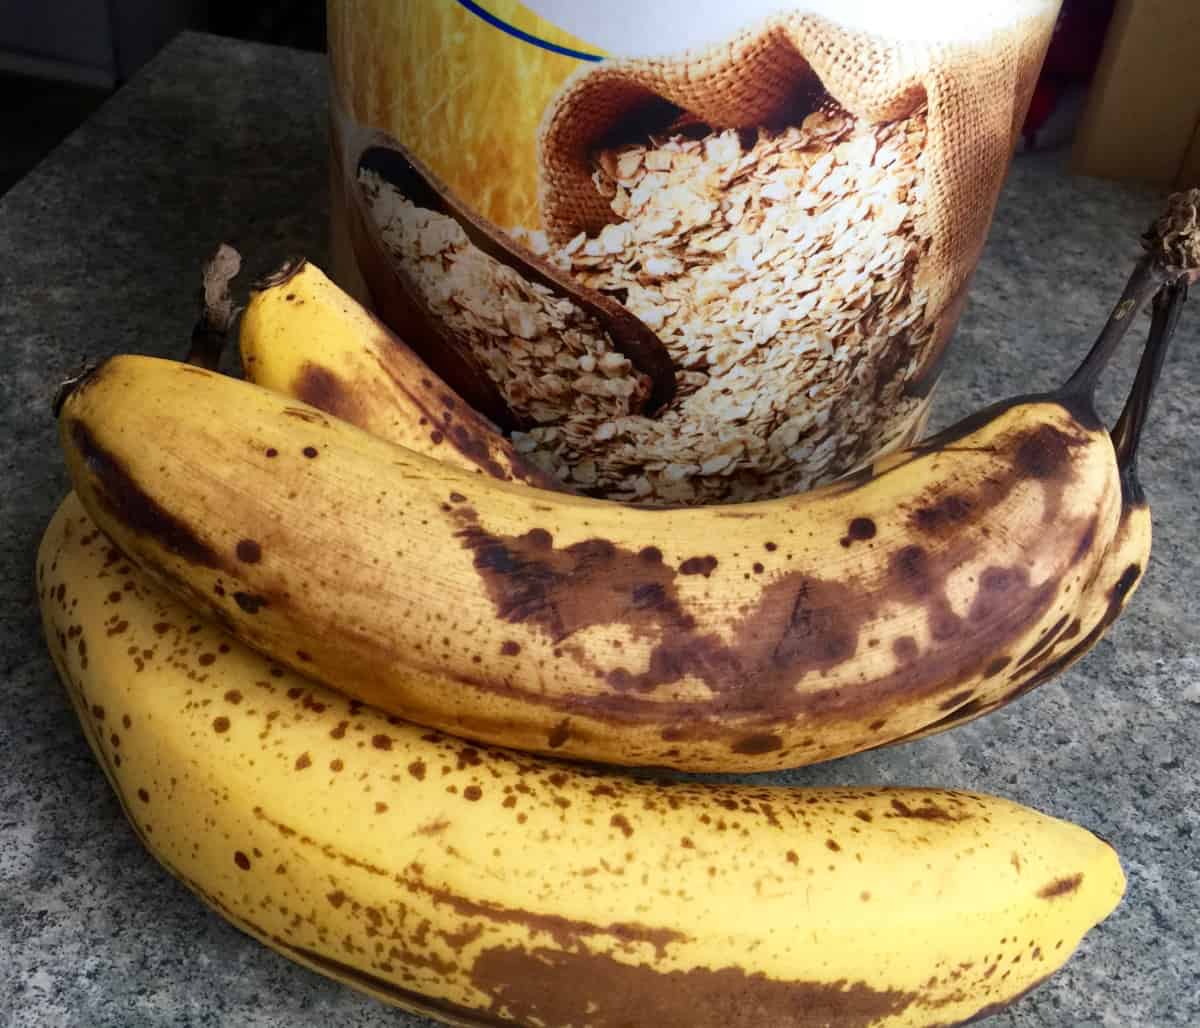 Container of rolled oats and ripe bananas up close.